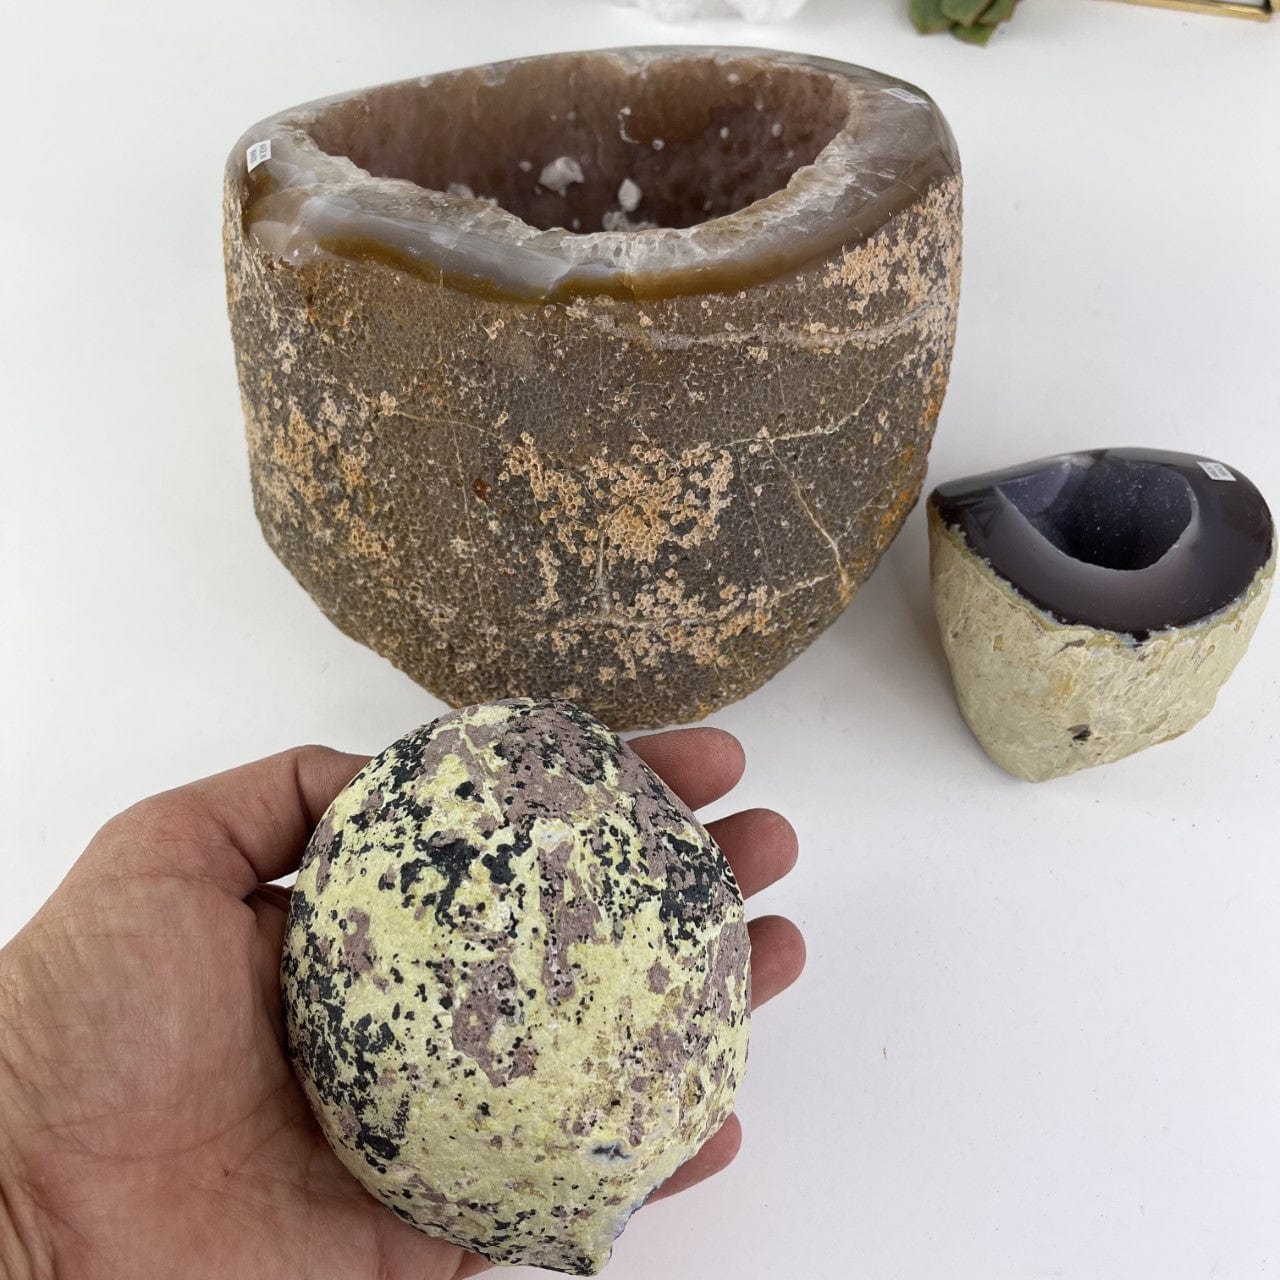 Bulk Lot 3 Polished Geode Halves with one in the hand, showing side view